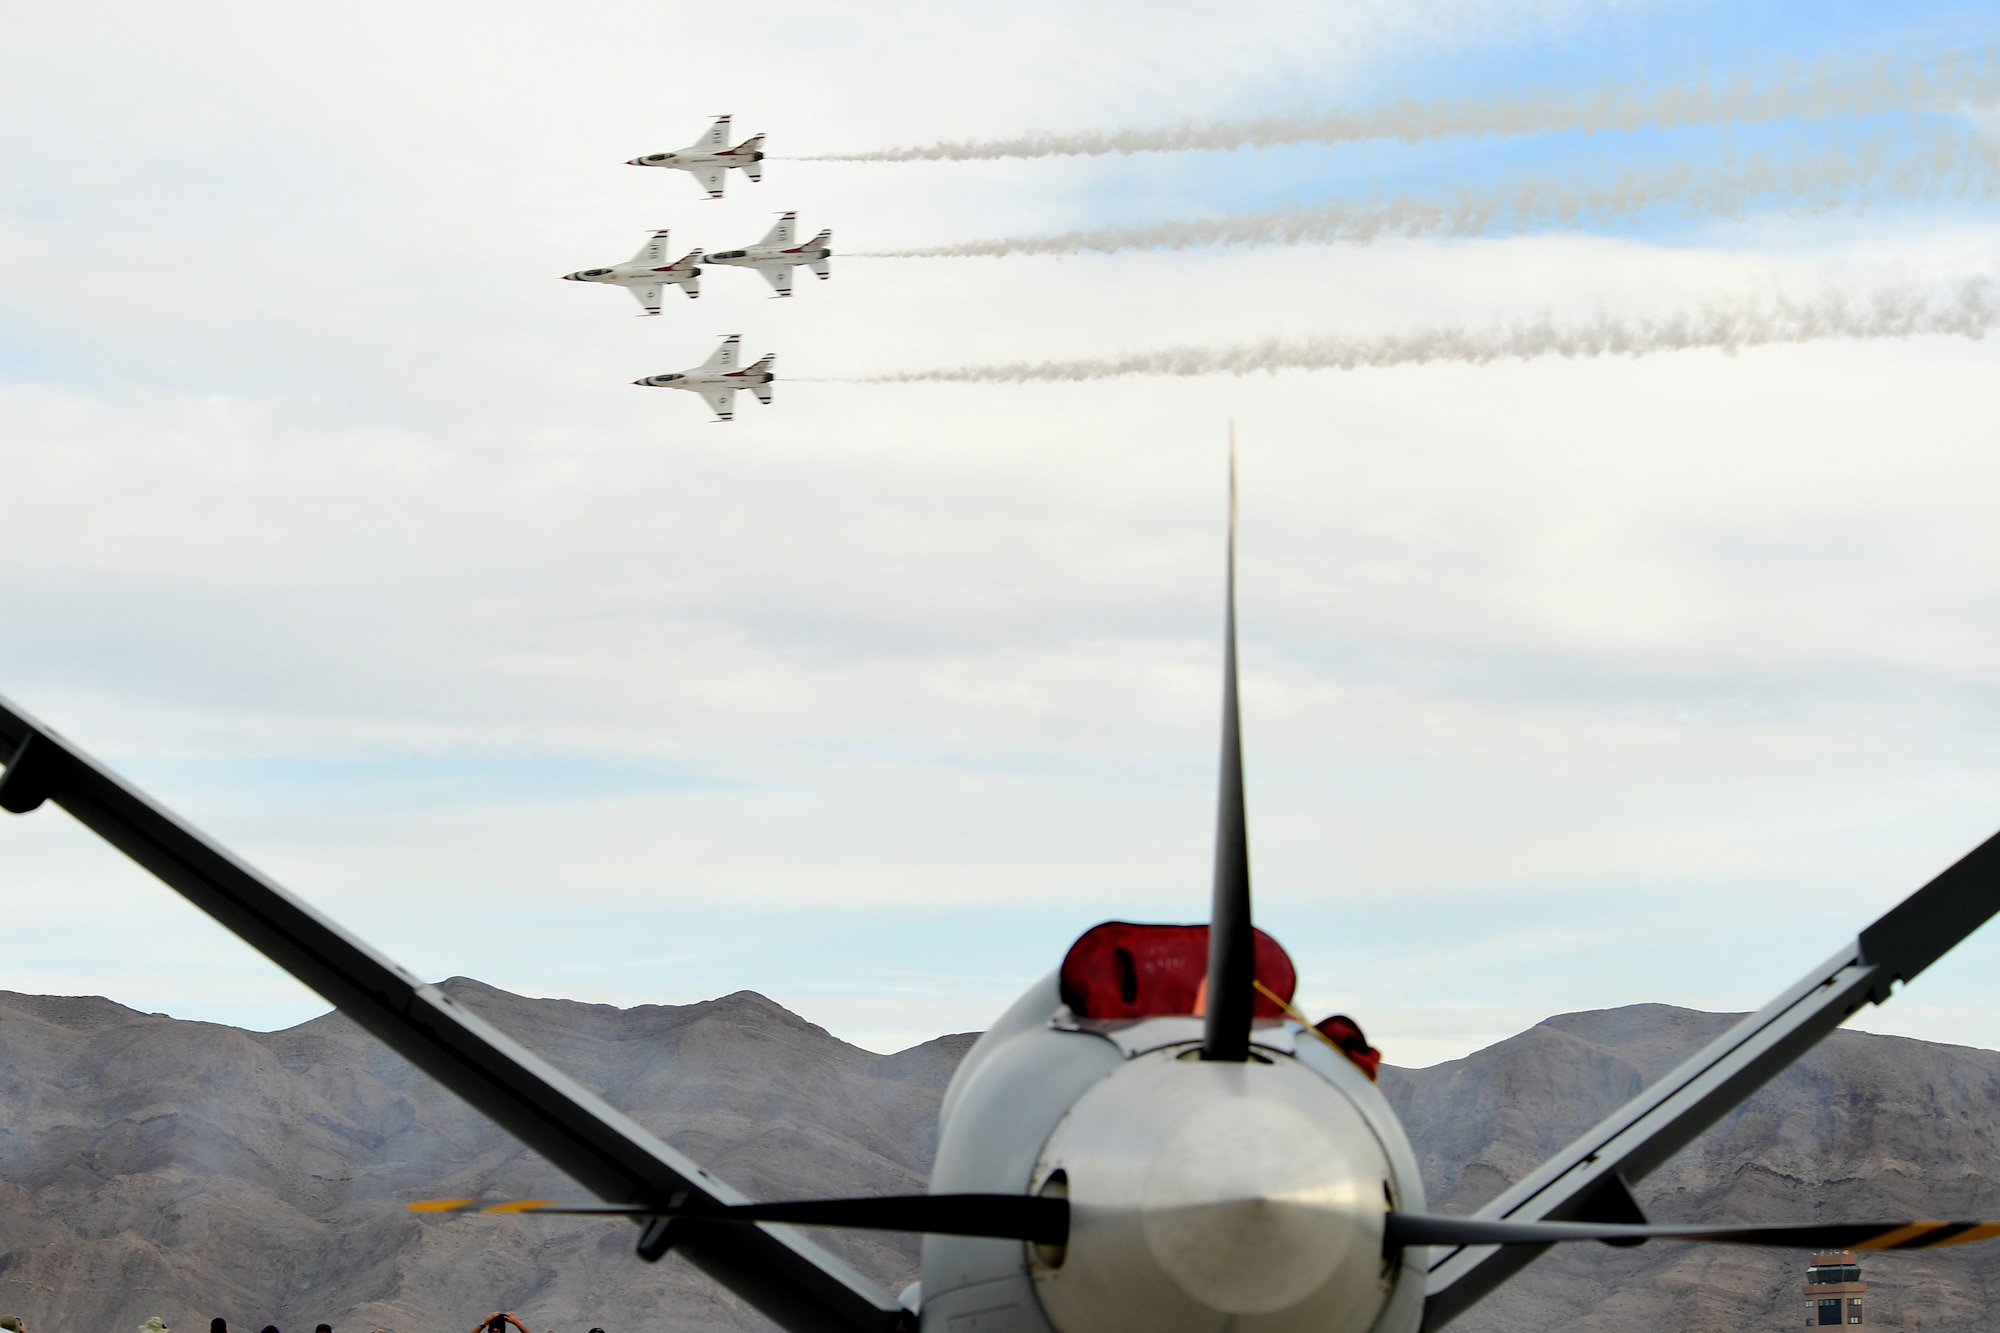 The U.S. Air Force Thunderbird aerial demonstration team pass over an MQ-9 Reaper during Aviation Nation Nov. 12, 2016, at Nellis Air Force Base, Nevada. The MQ-9 Reaper and MQ-1 Predator attracted many curious spectators interested to learn how the aircraft worked and their capabilities. (U.S. Air Force photo by Senior Airman Christian Clausen/Released)